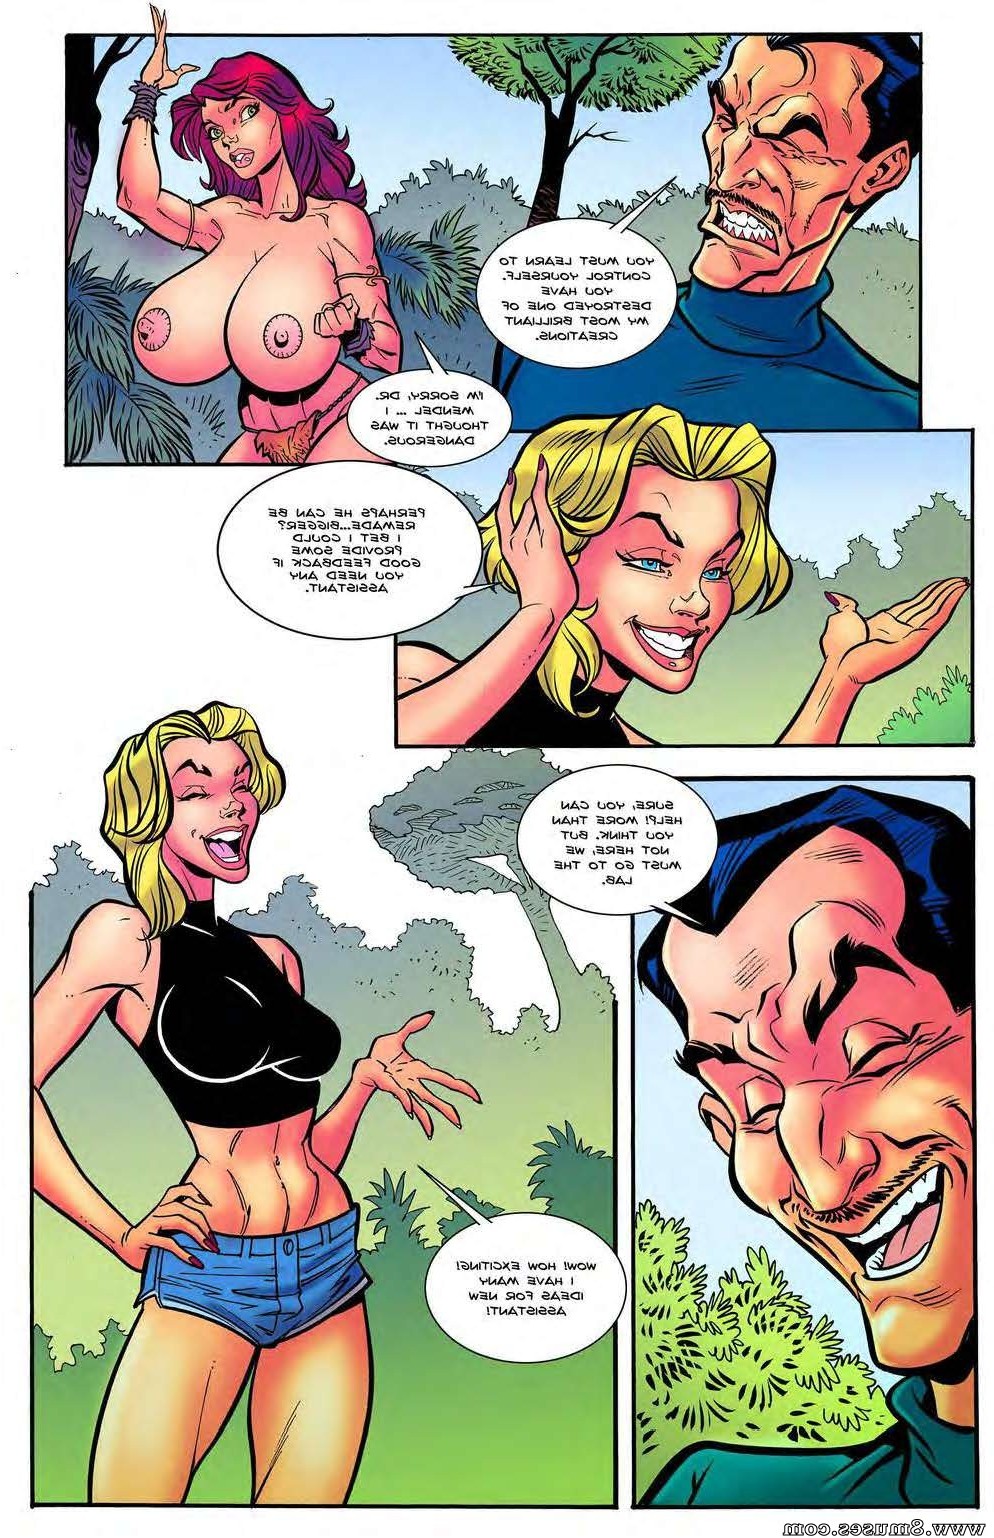 BE-Story-Club-Comics/Danger-Breast/Issue-5 Danger_Breast_-_Issue_5_3.jpg